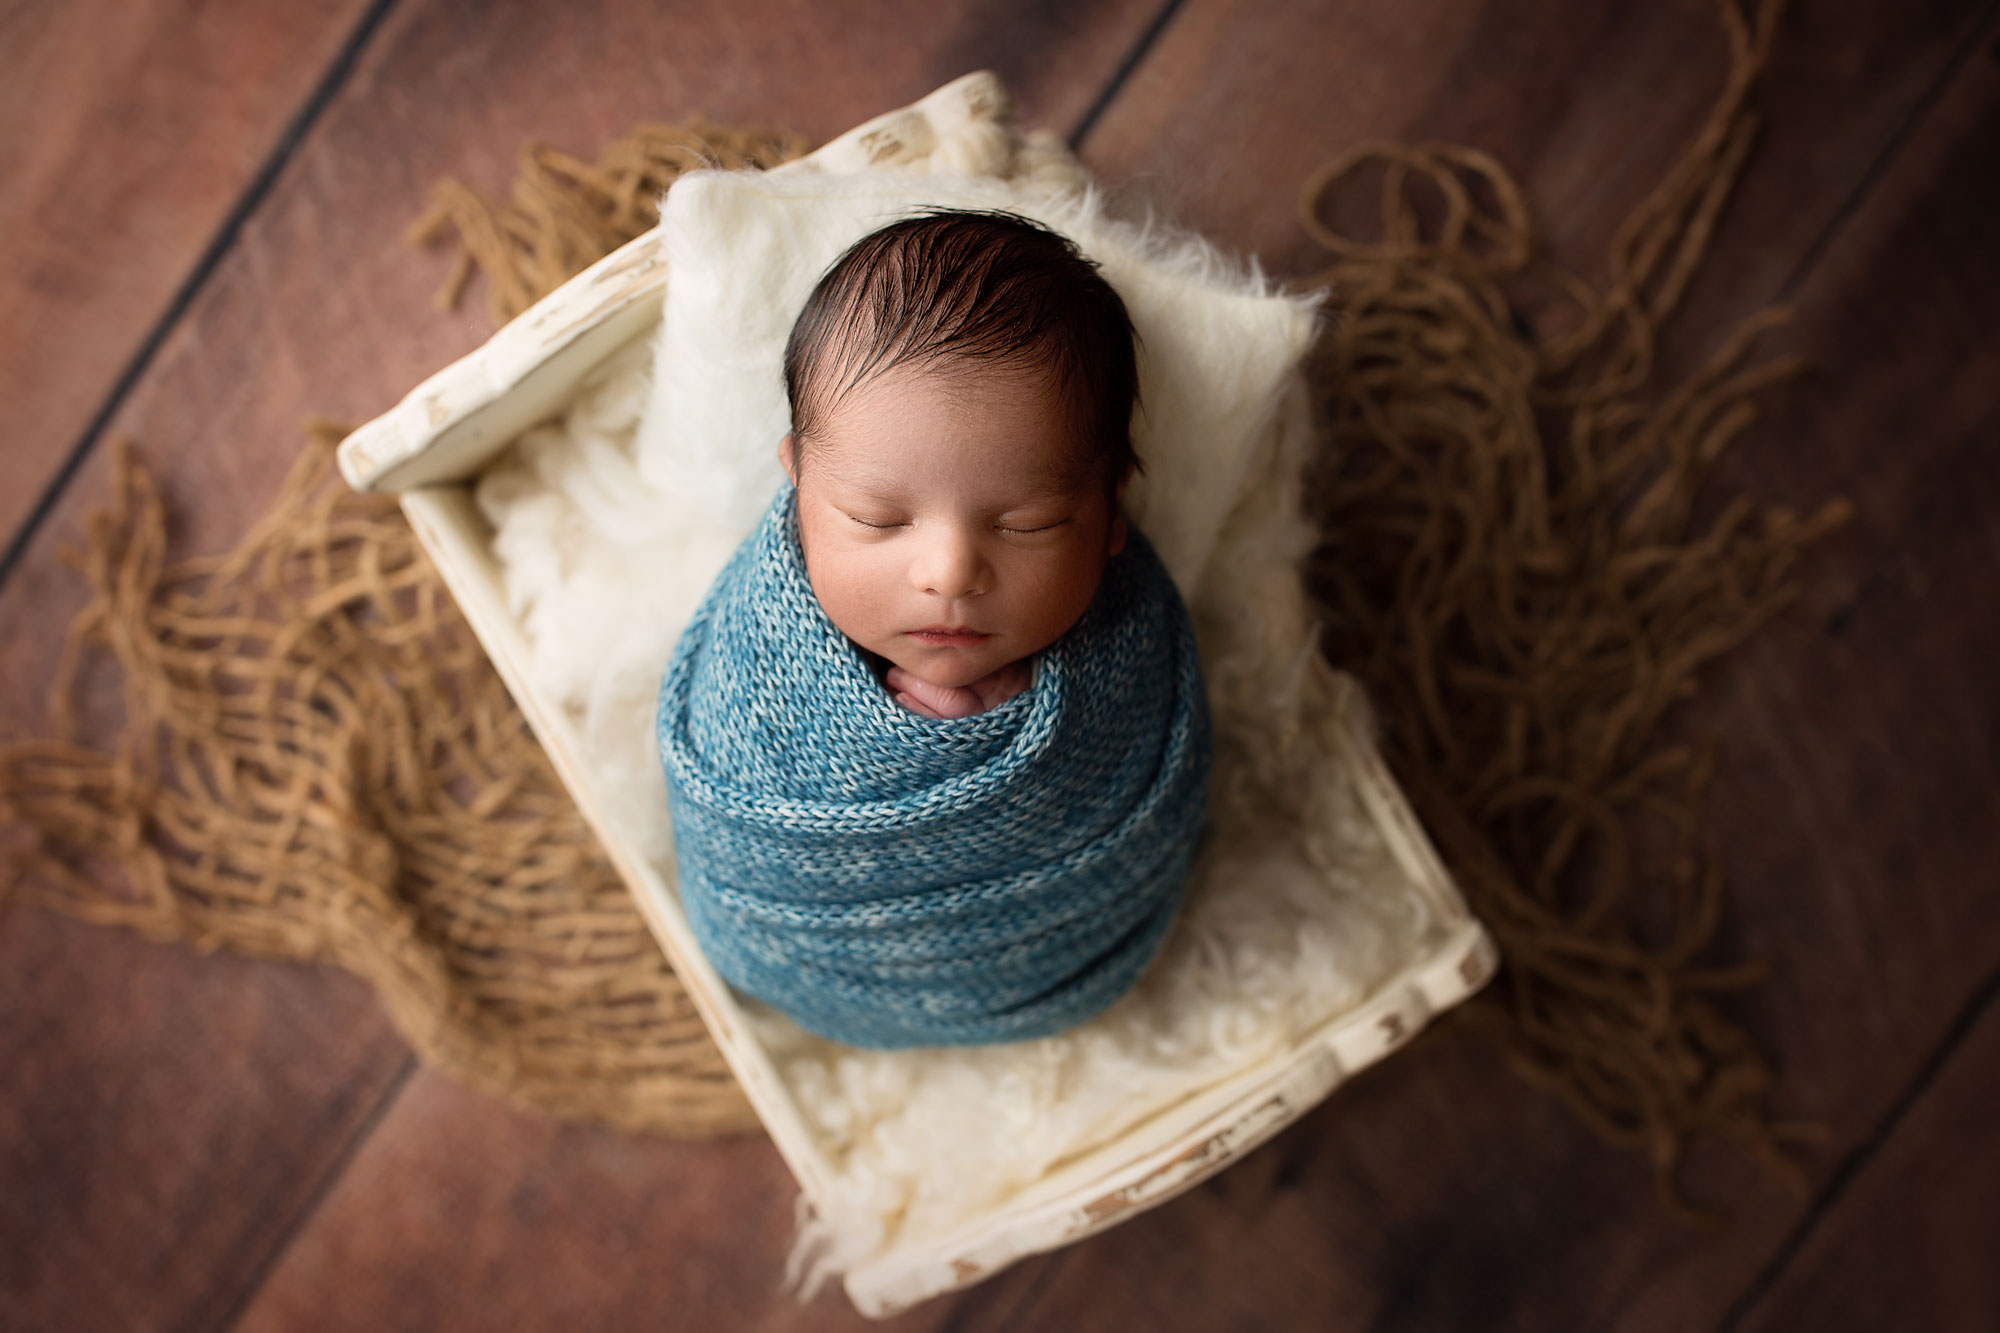 Somerset county NJ newborn photo session baby boy sleeping all wrapped up